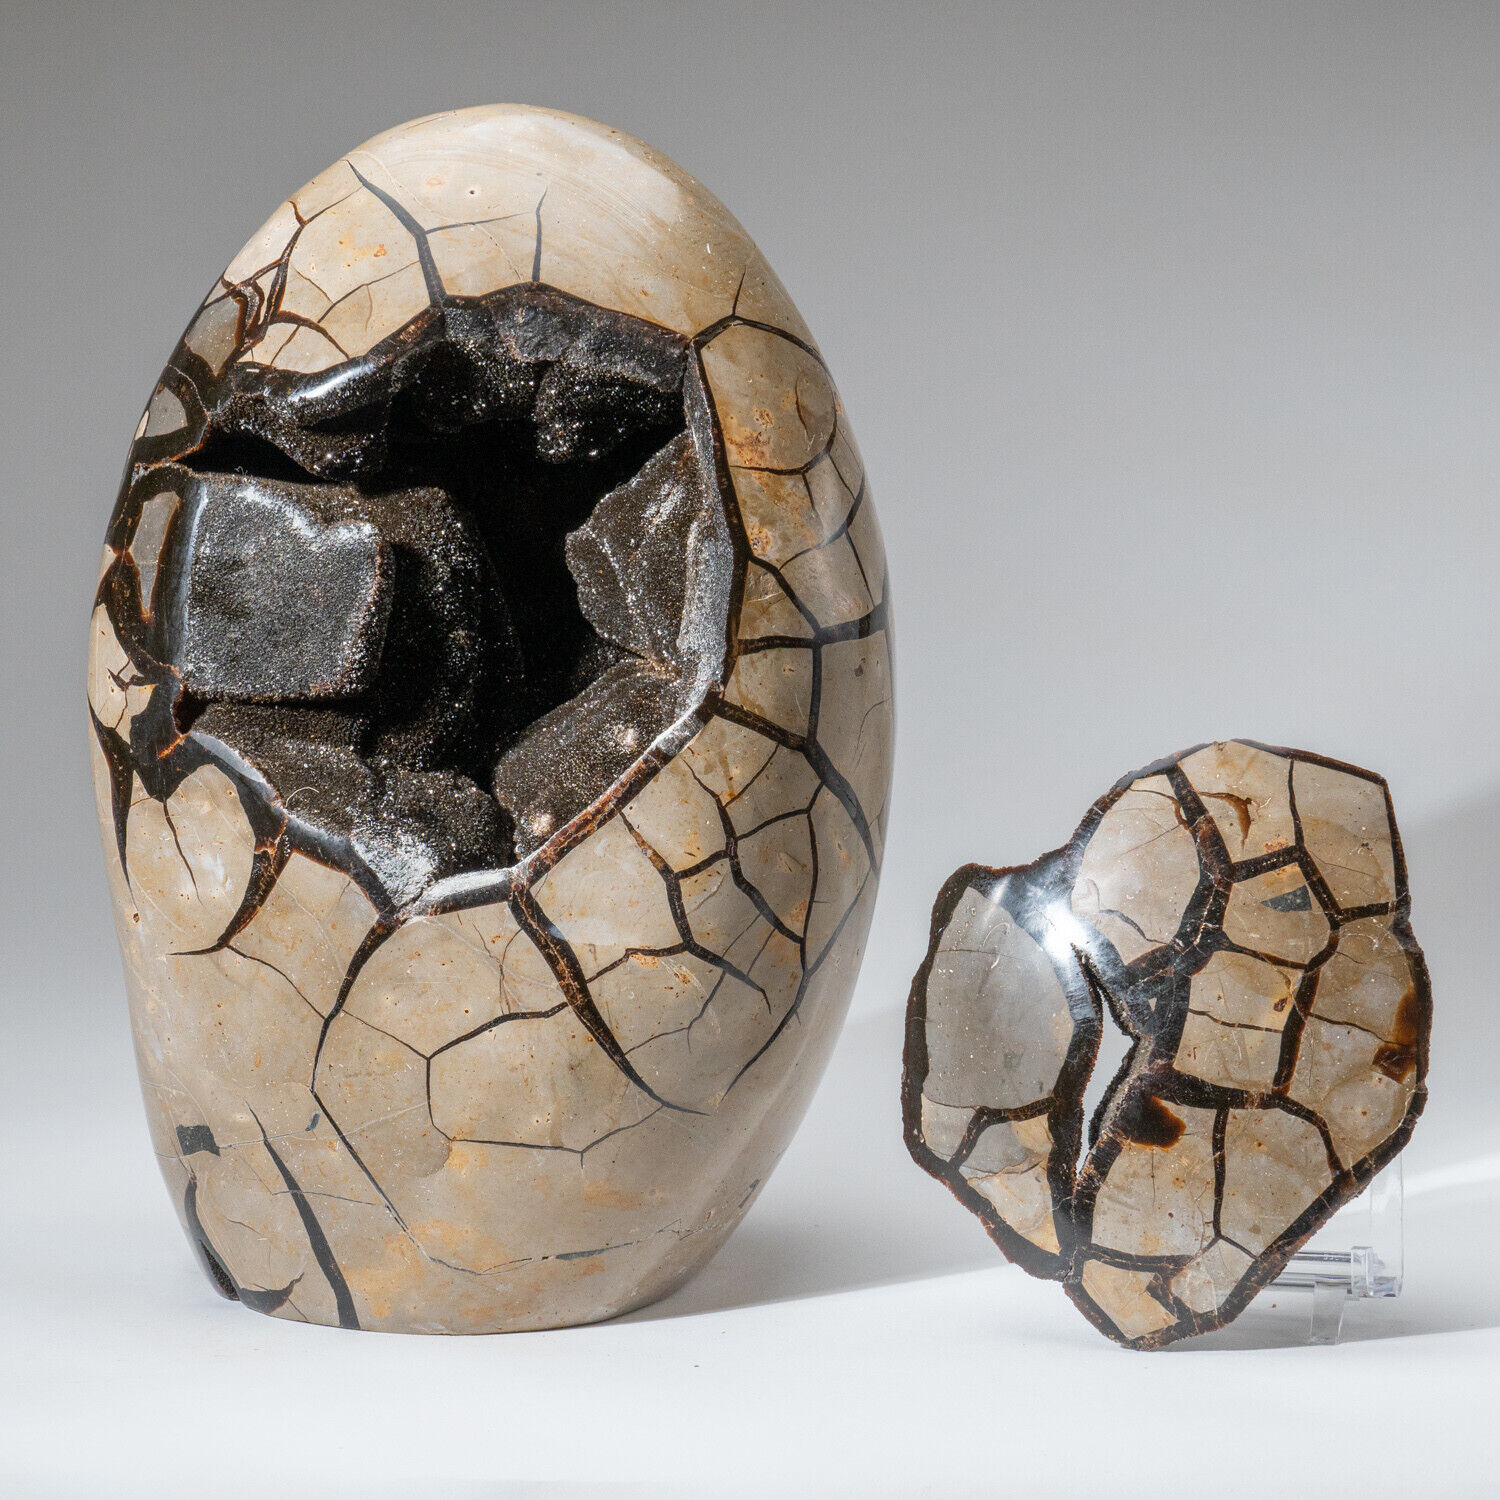 Polished Lrge Septarian Druzy Geode Egg from Madagascar (35 lbs)